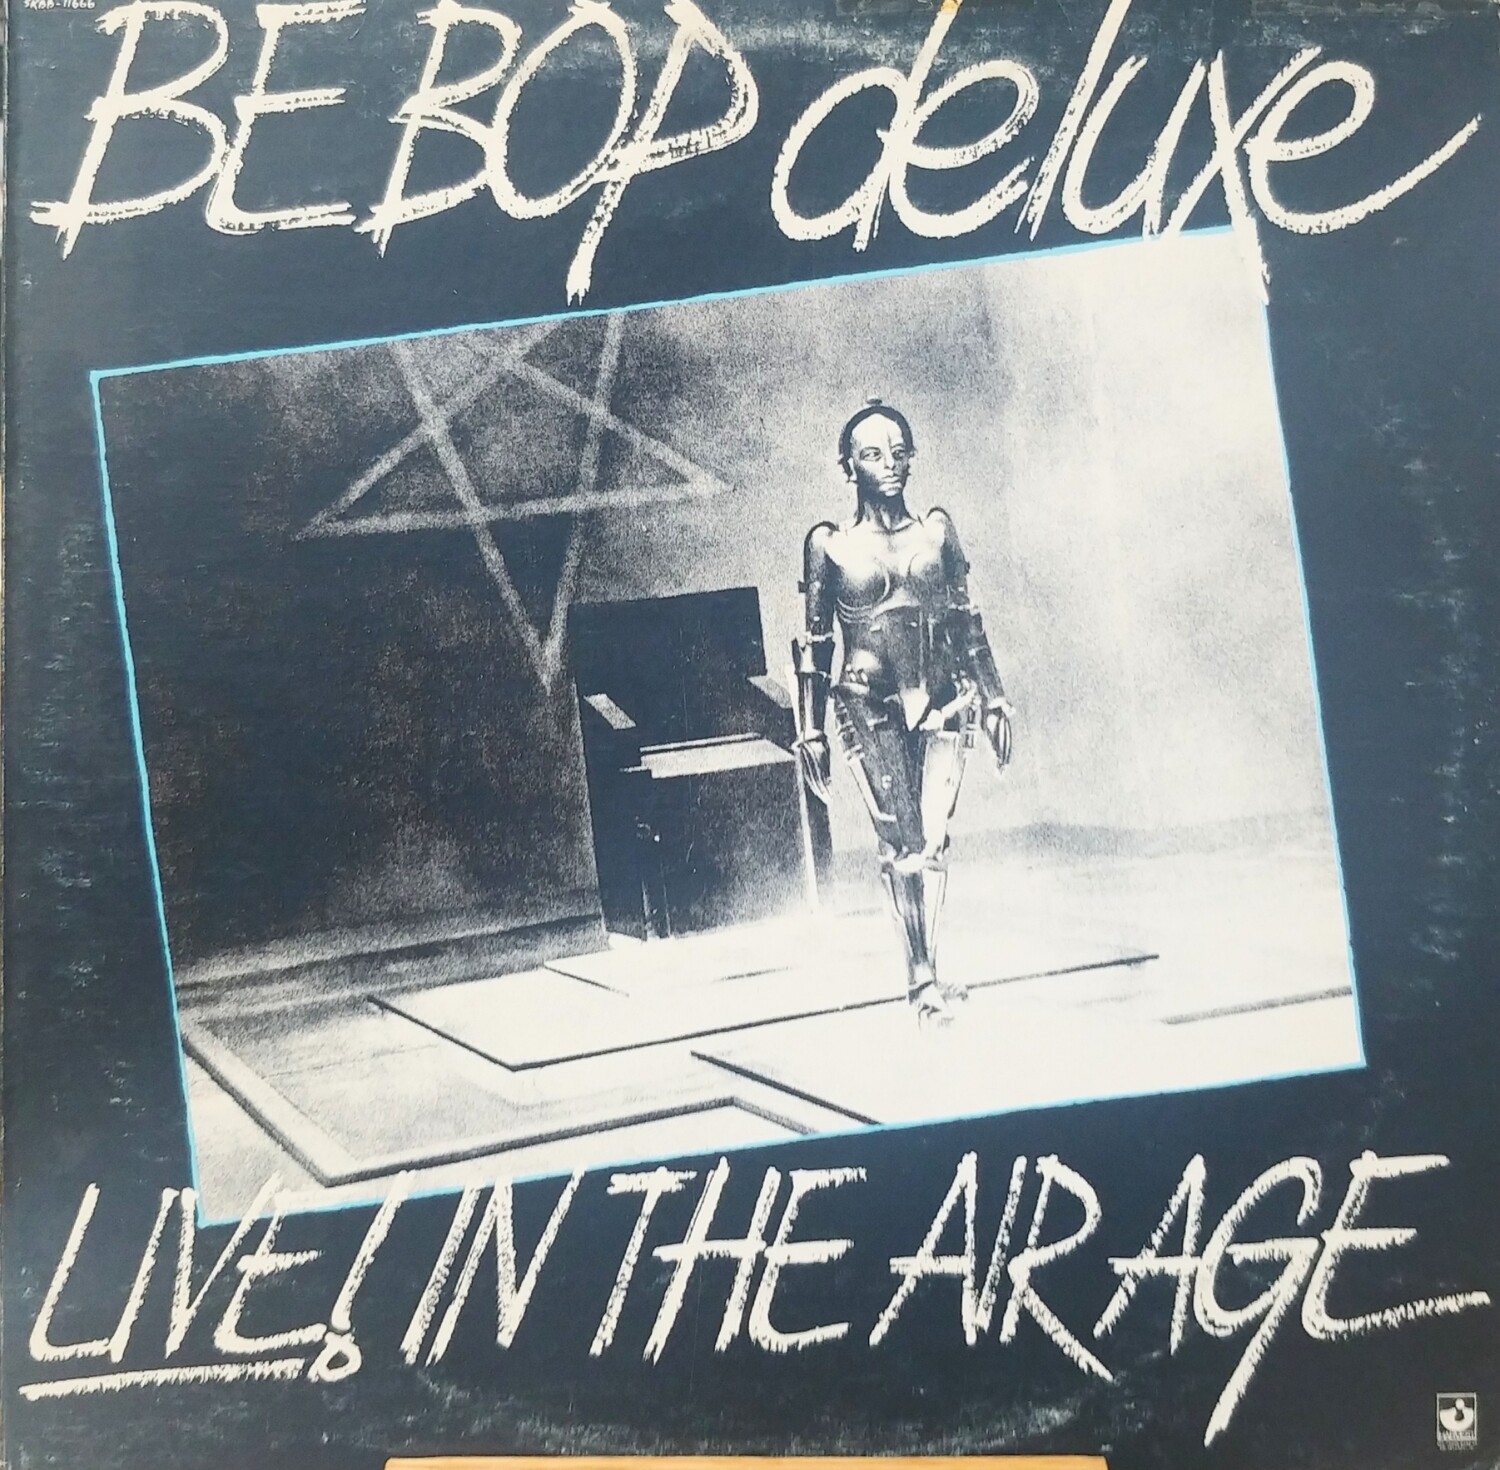 Bebop Deluxe - Live in the air age